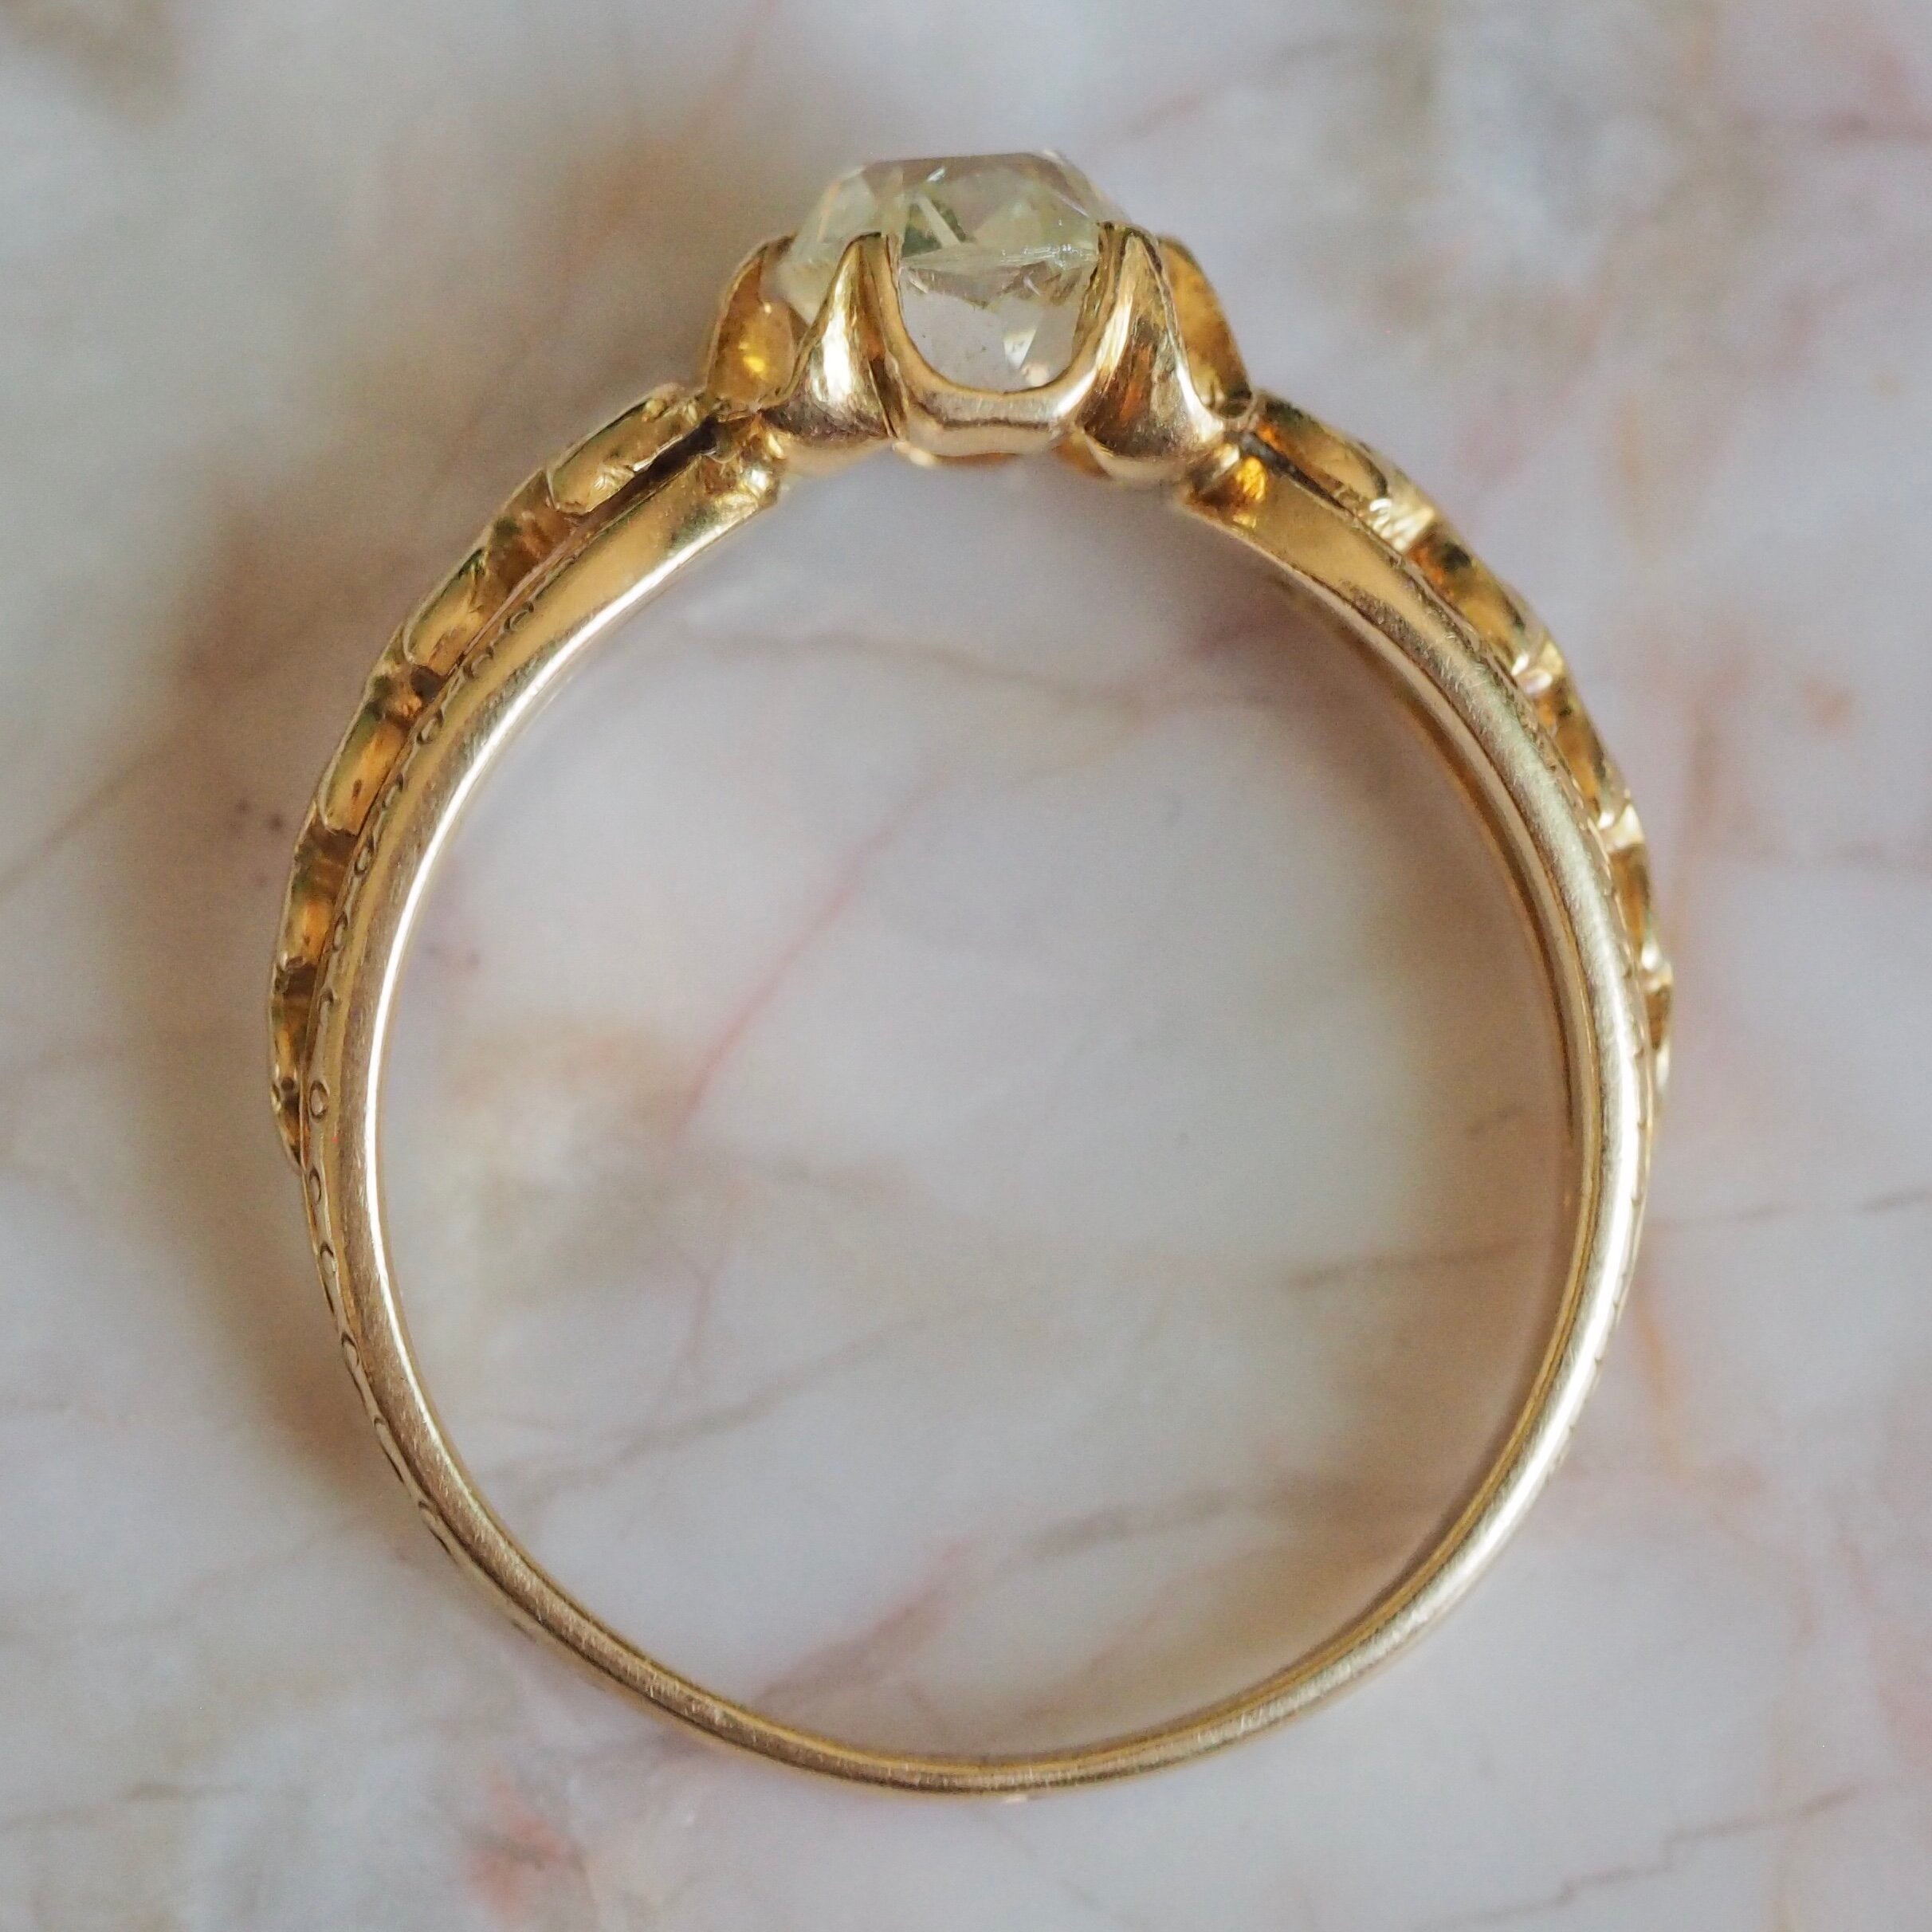 Antique French 18k Gold Old Mine Cut Diamond Engagement Ring